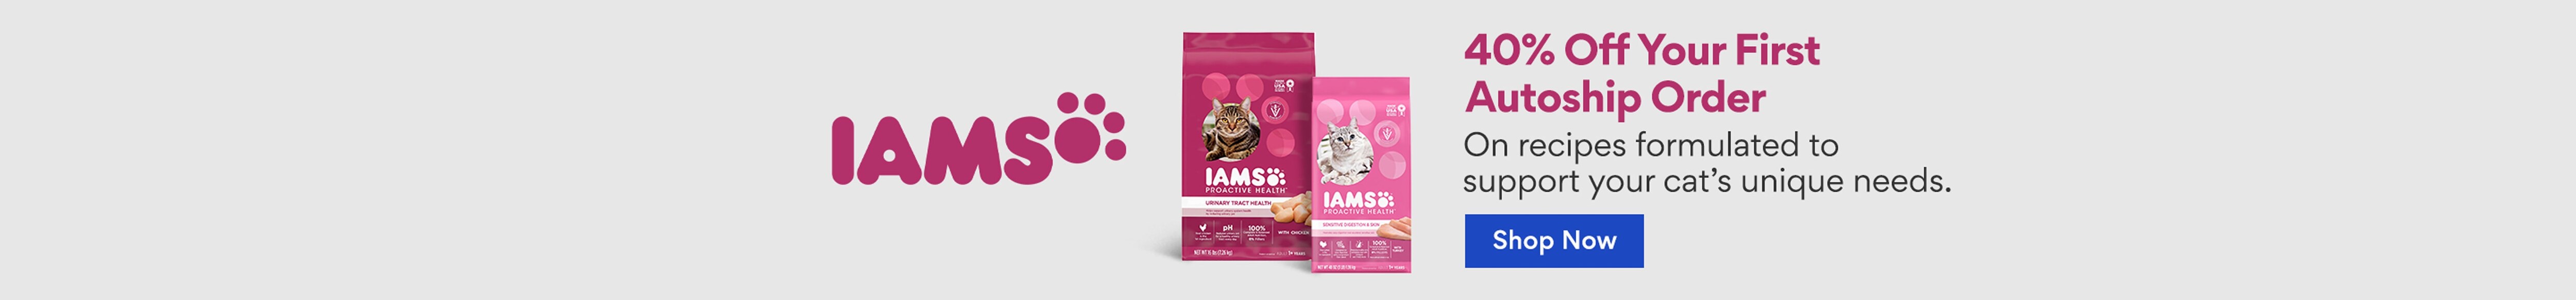 IAMS 40% off your first autoship order on recipes formulated to support your cat's unique needs. shop now